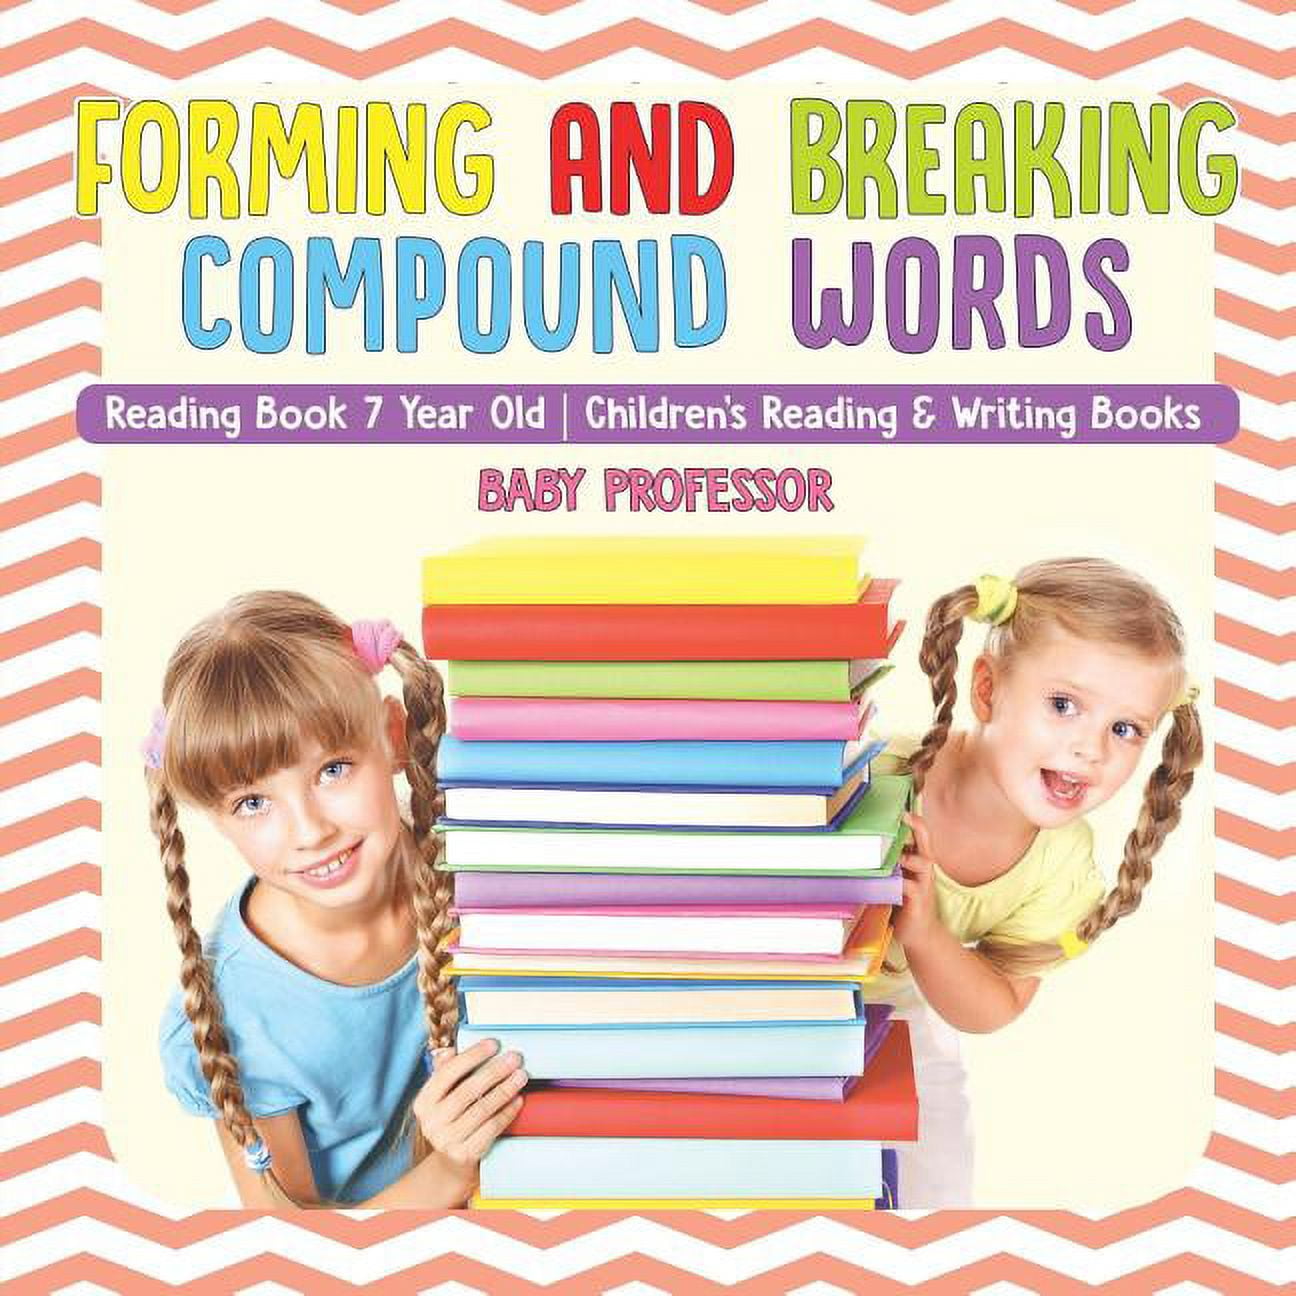 Forming and Breaking Compound Words - Reading Book 7 Year Old Children's Reading & Writing Books [Book]